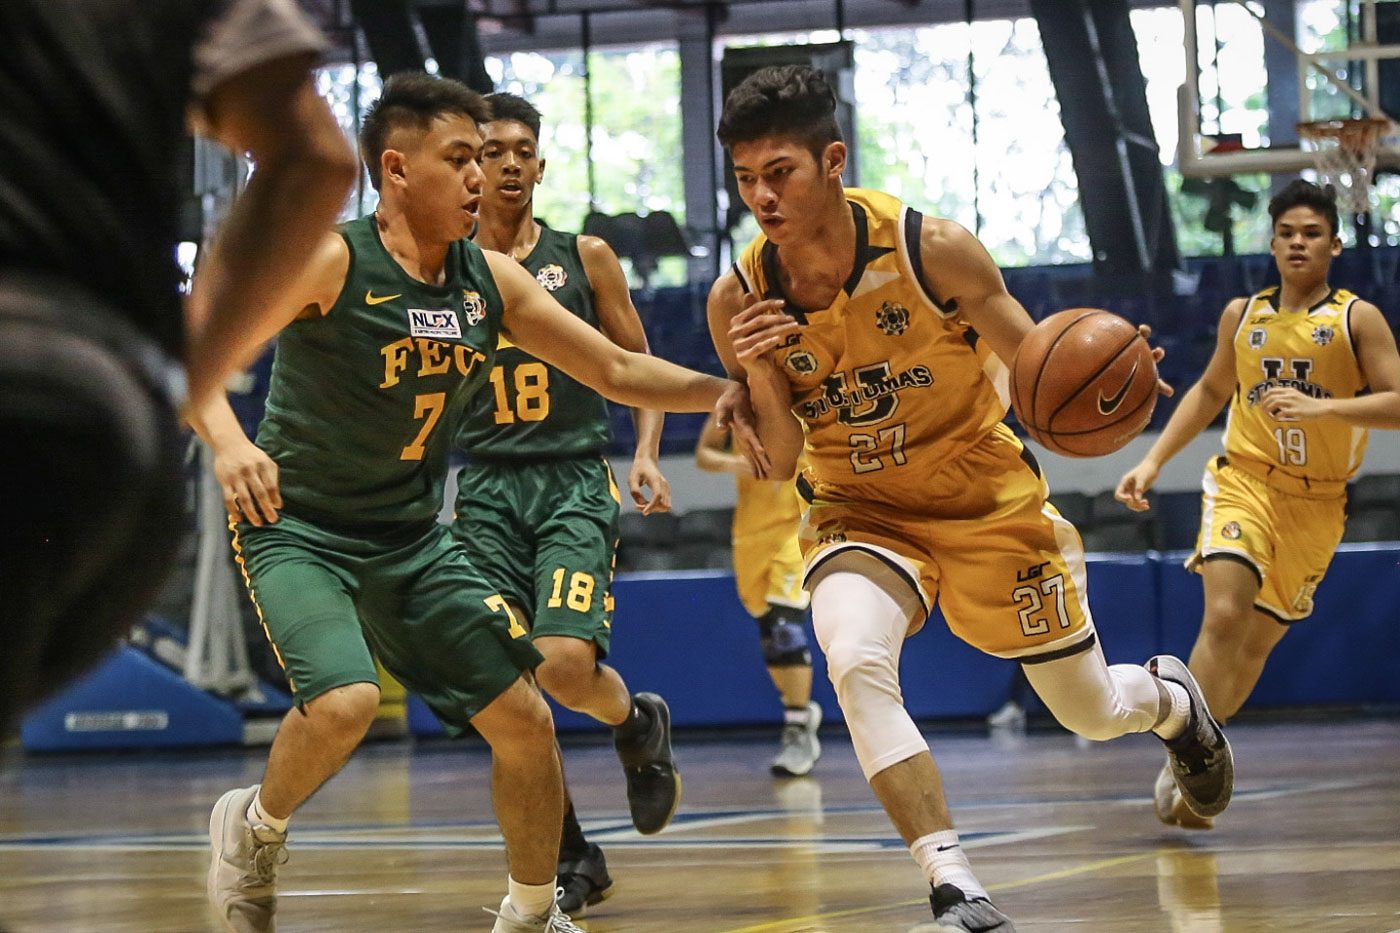 UST’s CJ Cansino a cinch to claim MVP in UAAP Jrs basketball